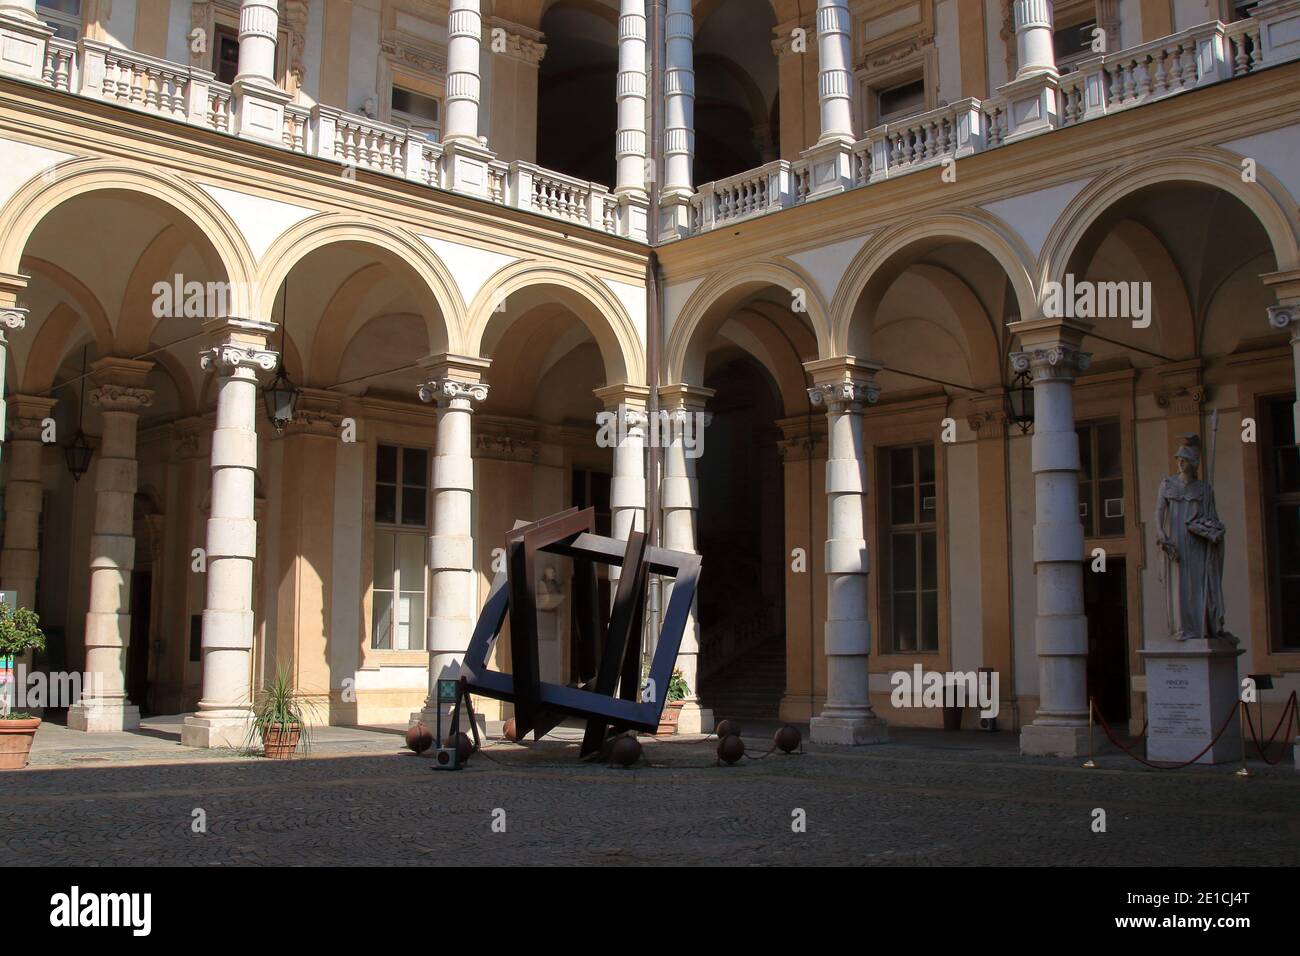 Turin, Italy - september 2020: baroque arcades in the inner courtyard of the rectory building in central Po street Stock Photo